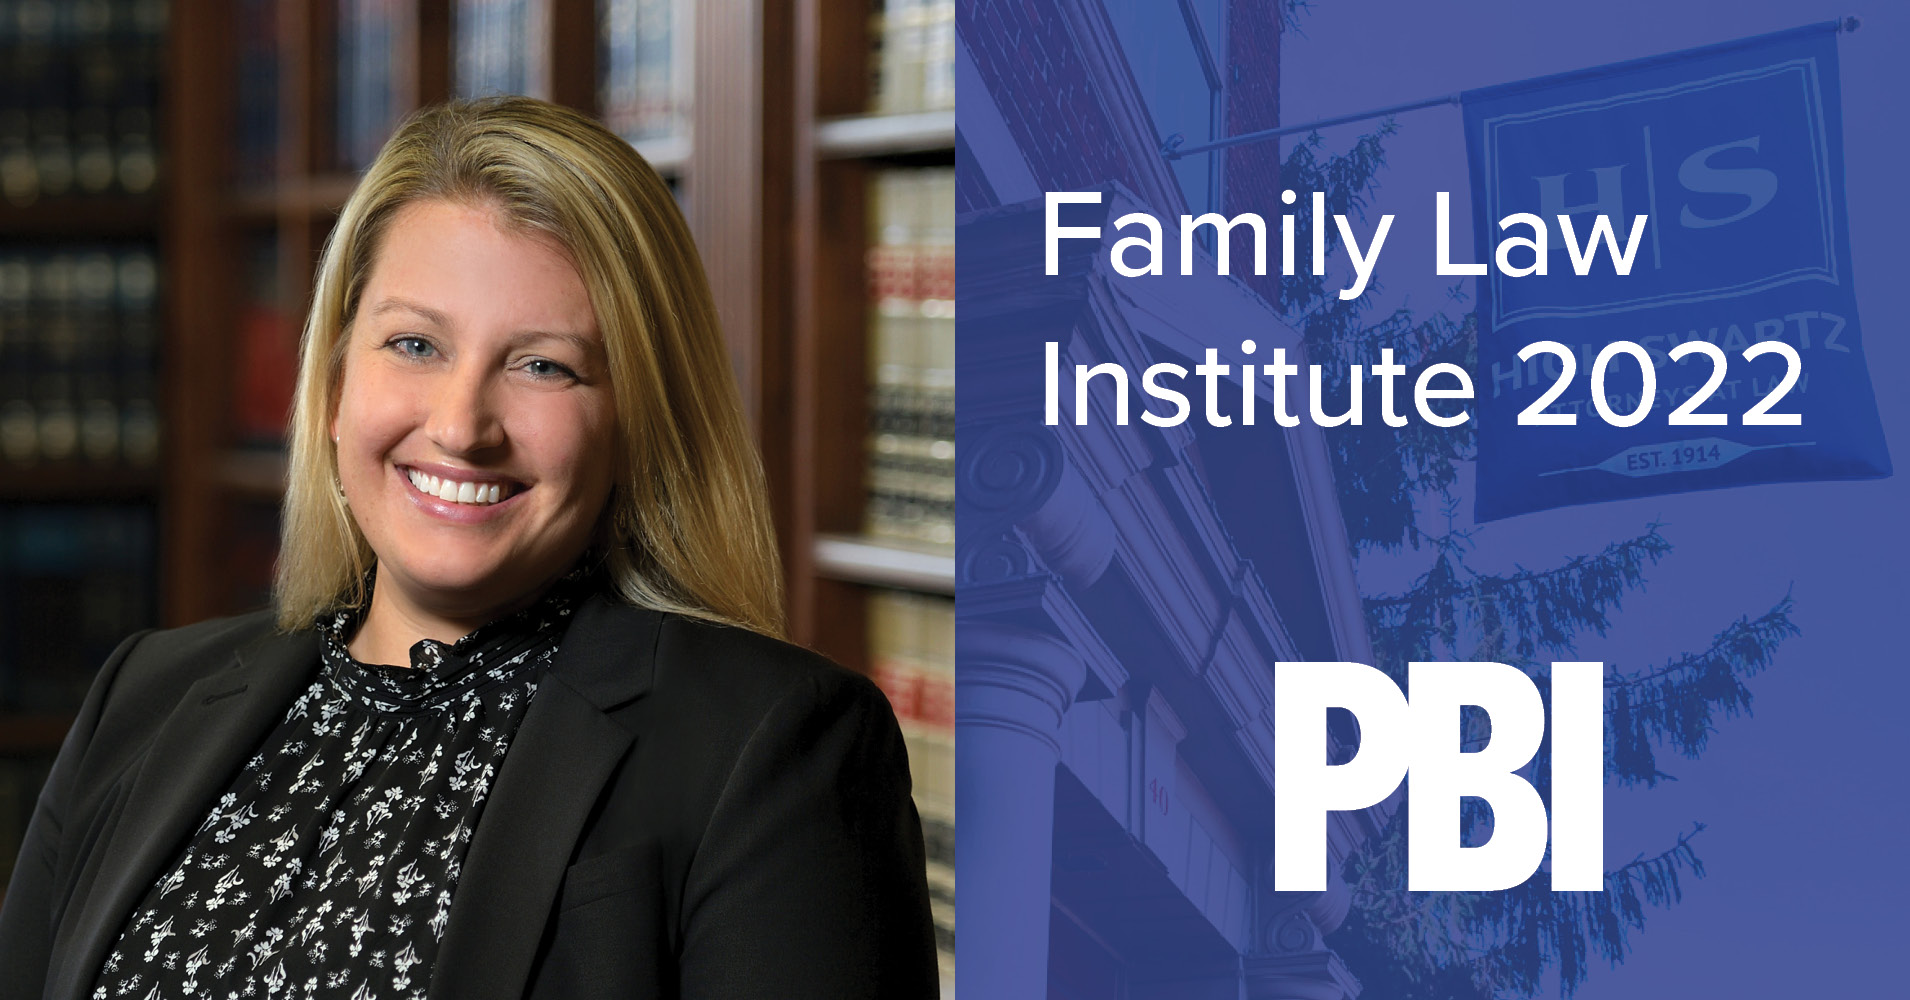 PBI's Family Law Institute 2022 is an interactive and virtual CLE that is a premier event for PA family law attorneys